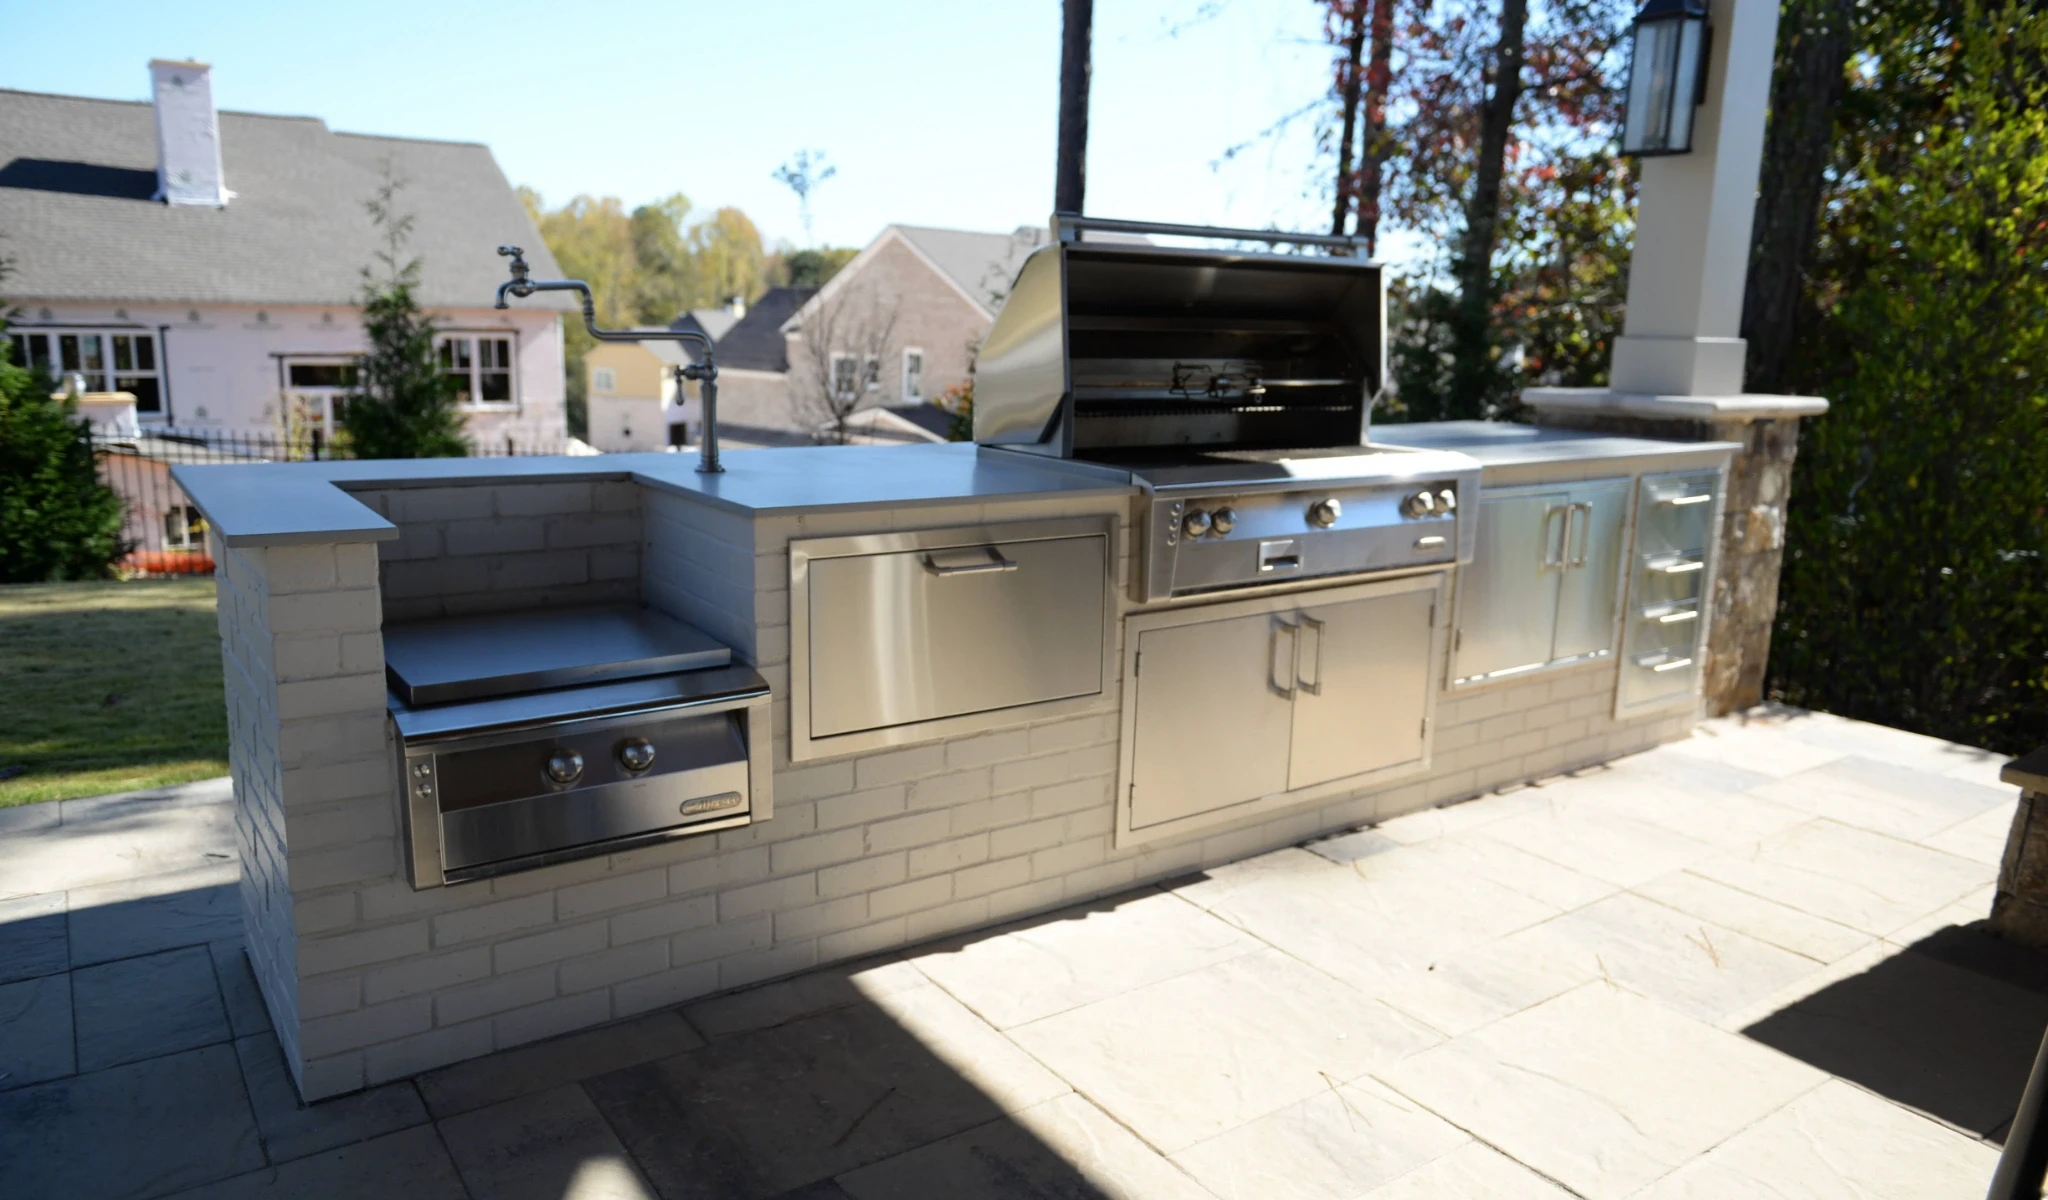 A custom outdoor kitchen with stainless steel appliances designed by a home designer.